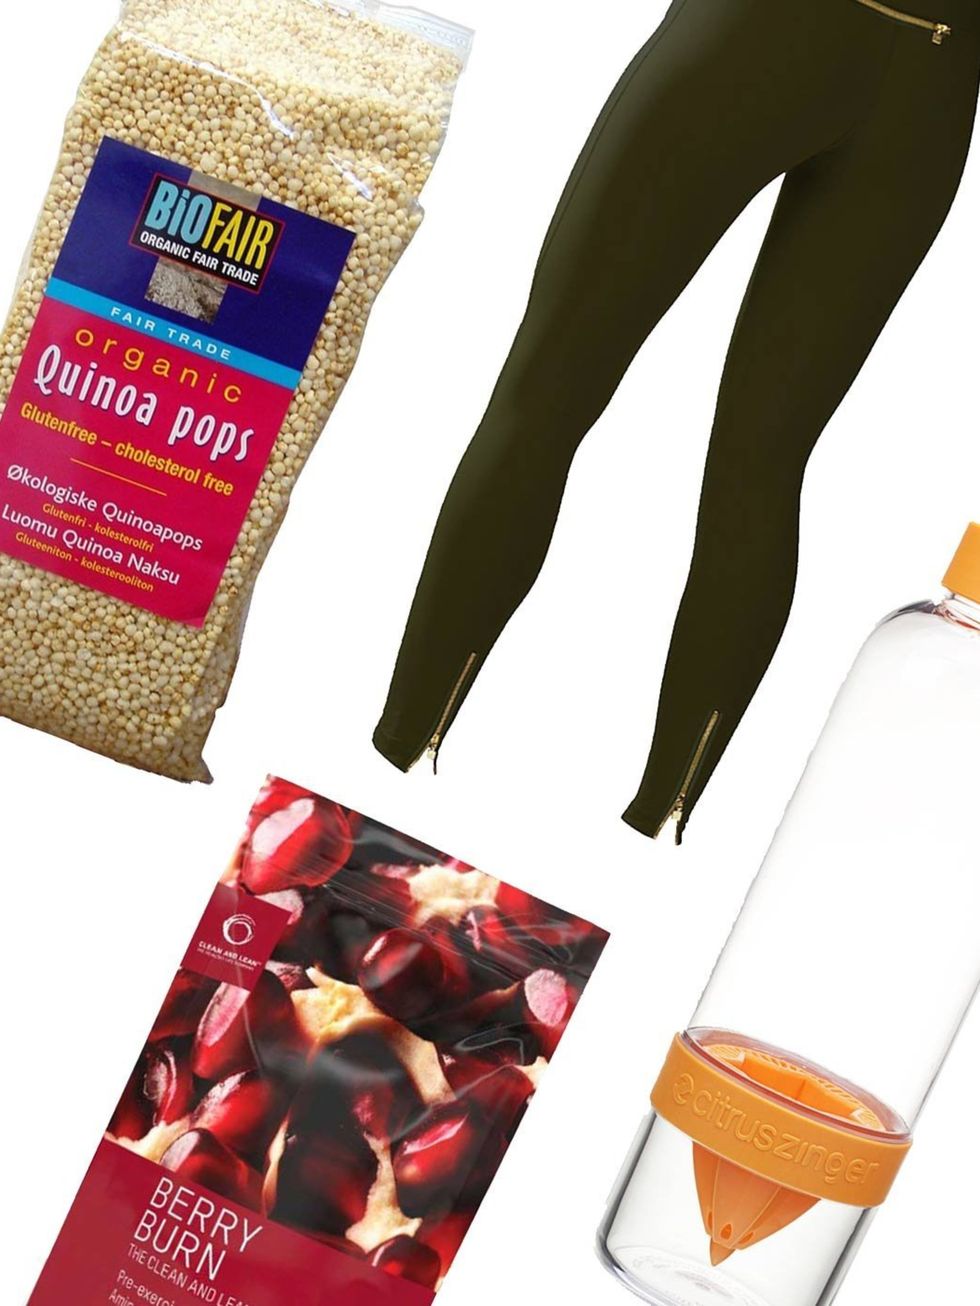 <p>Seen <a href="http://www.elleuk.com/magazine">Fit notes in ELLE magazine</a>? Heres your weekly fix of all things health and fitness. </p><p>This week  luxe leggings you'll want to wear in and out of the gum, plus the tasty alternative to traditional